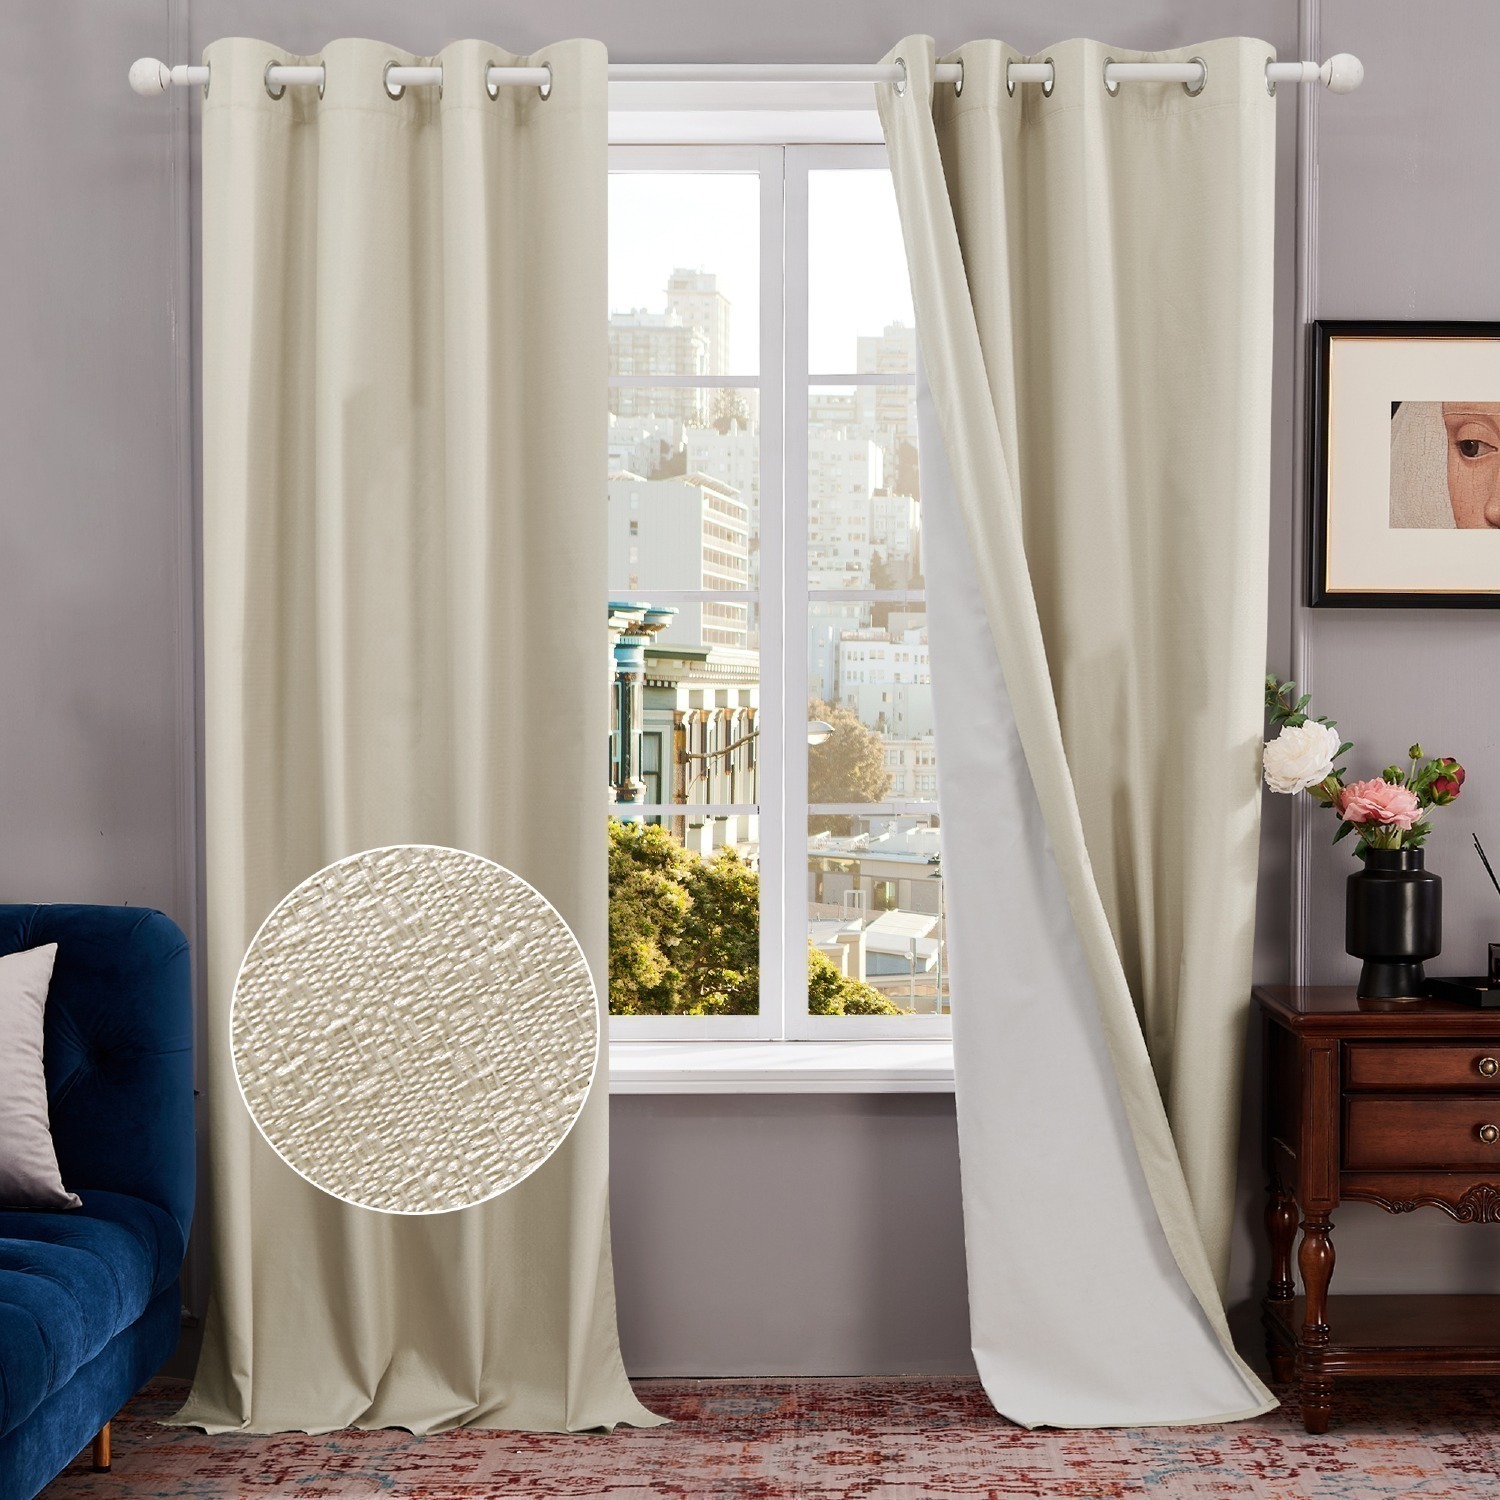 2-Pack Deconovo Lightweight Thermal Insulated Blackout Curtains (Various Colors/Sizes) from $10 + Free Shipping w/ Prime or on Orders $35+